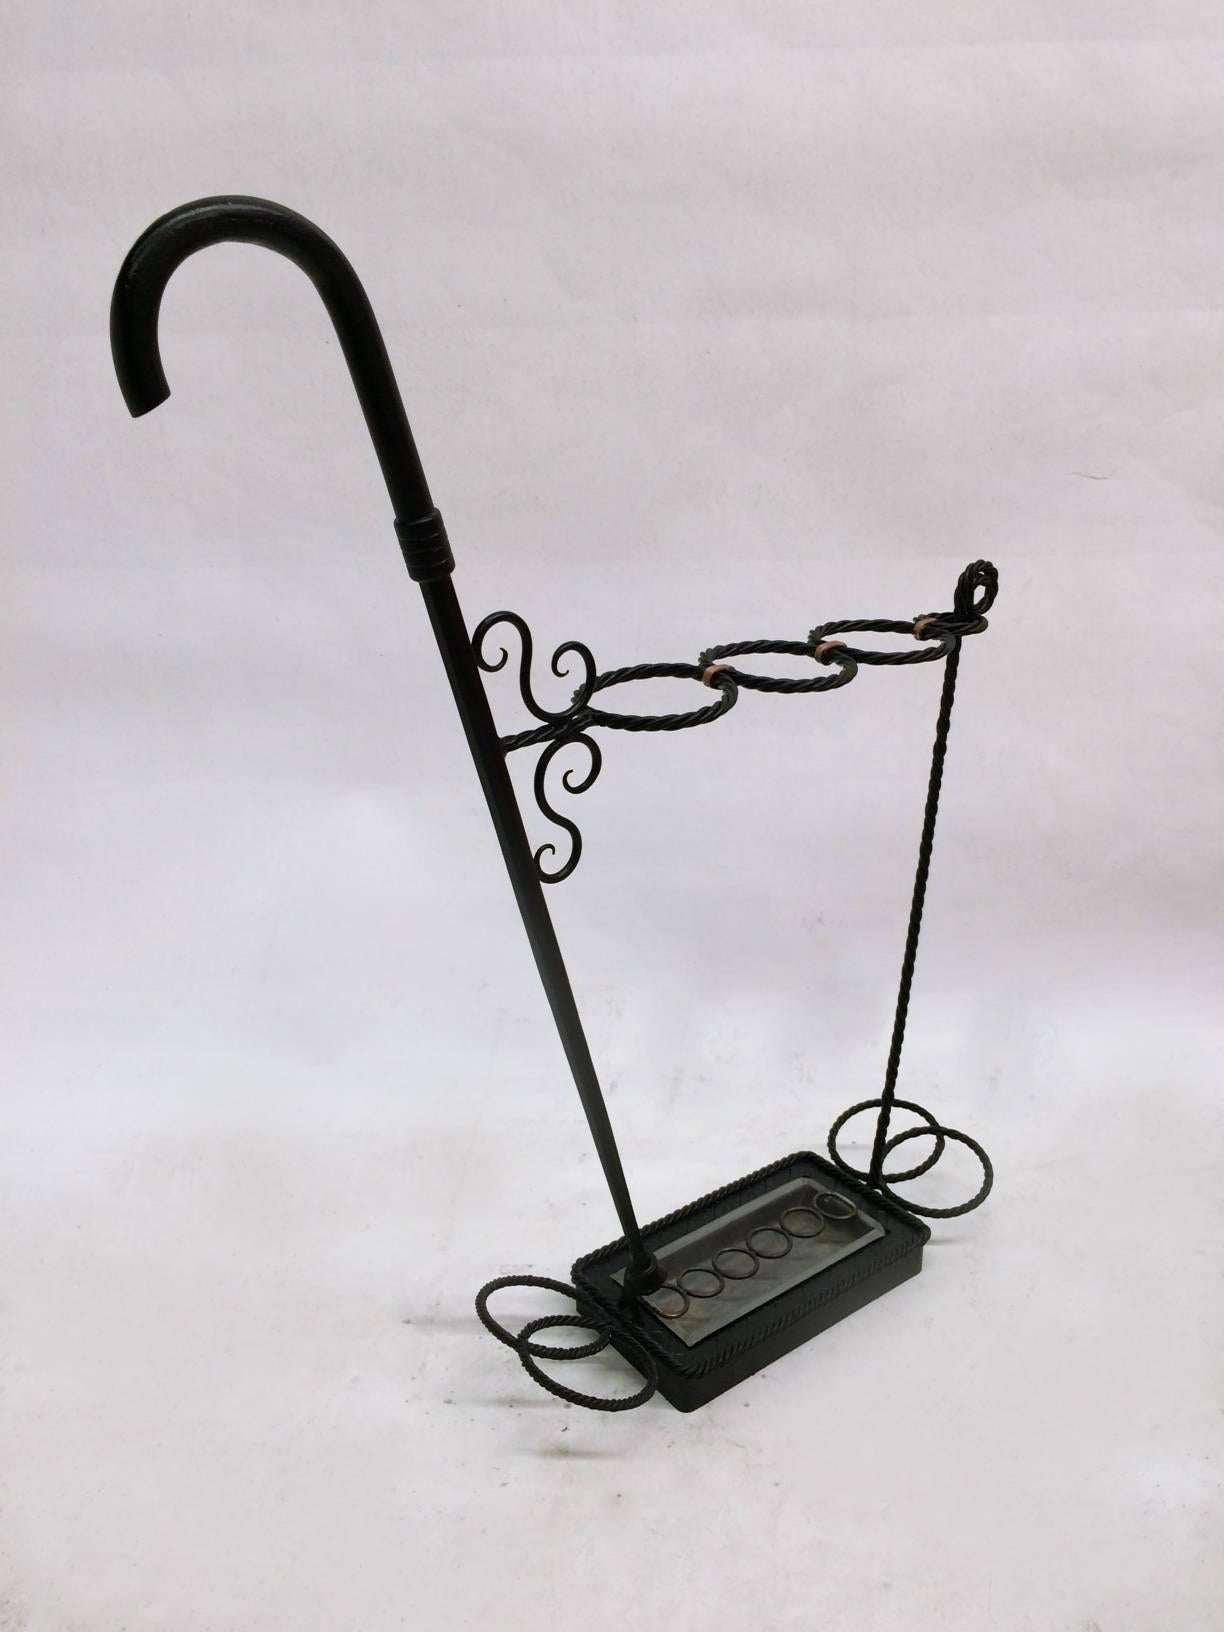 This umbrella stand is constructed of wrought iron steel and finished with copper embellishments. The steel is composed of thin strands woven like rope held together by copper rings and holding a removable tin base to collect water.